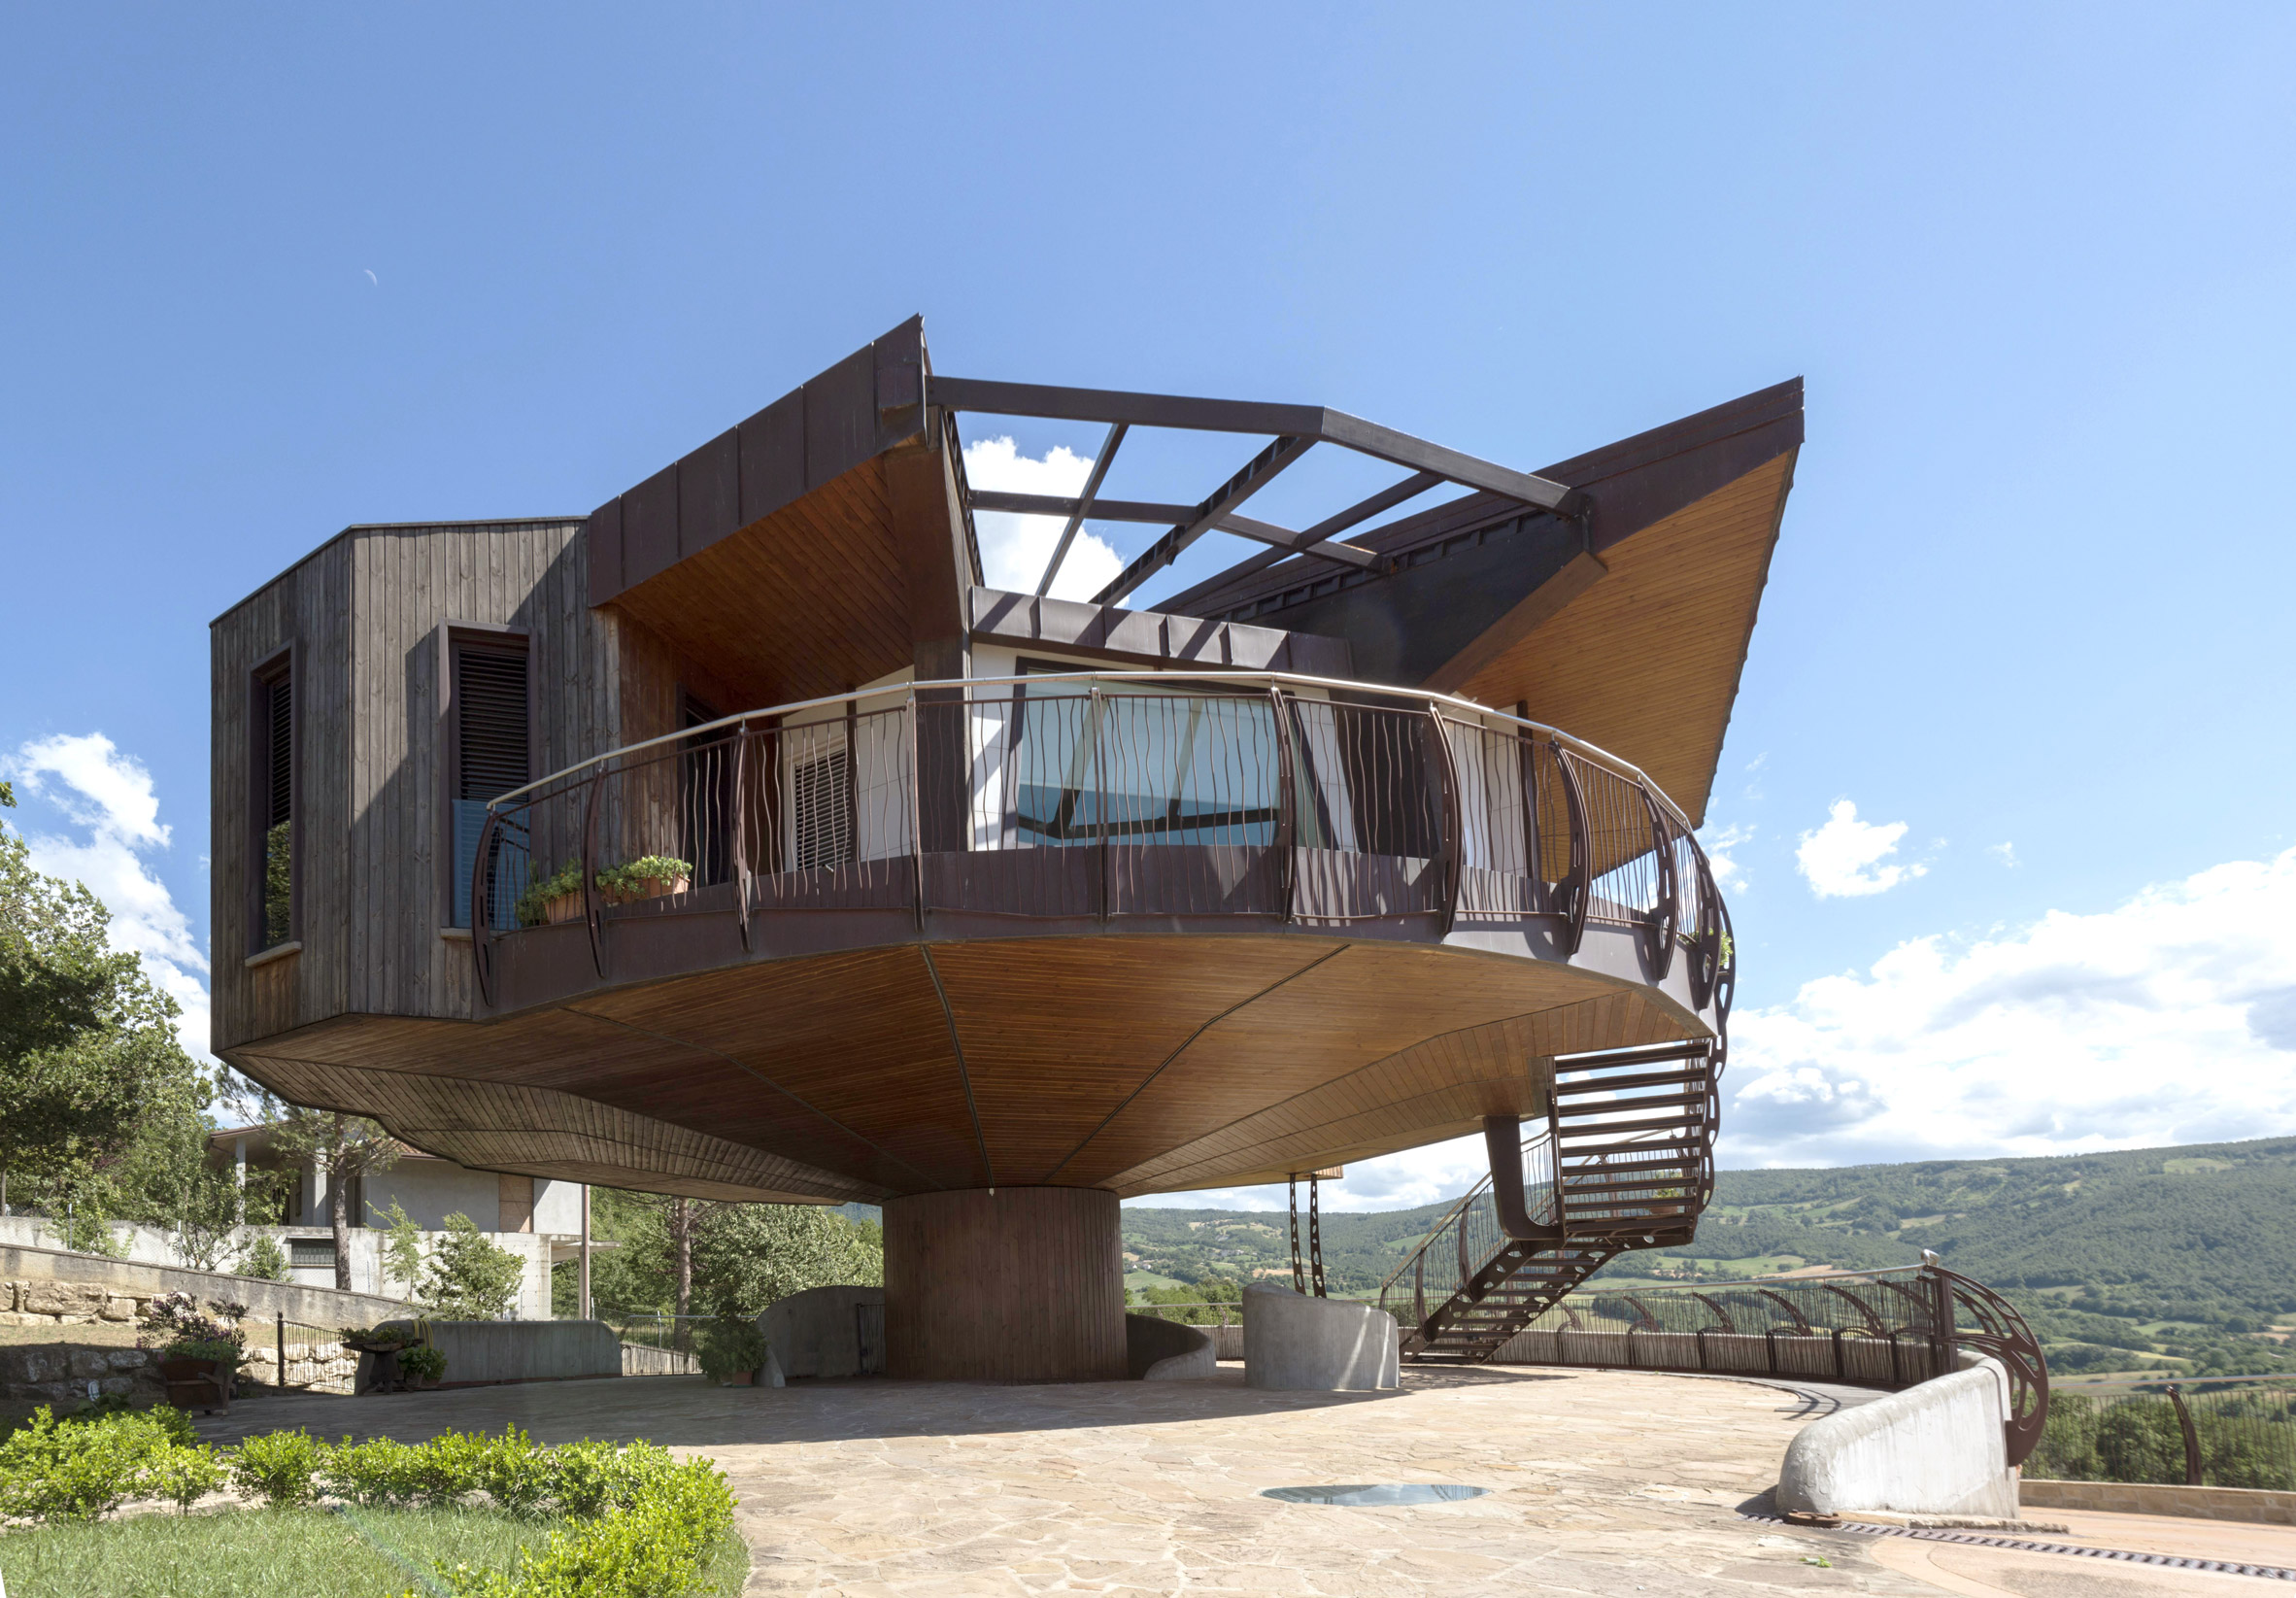 Fully rotating house built in Italy